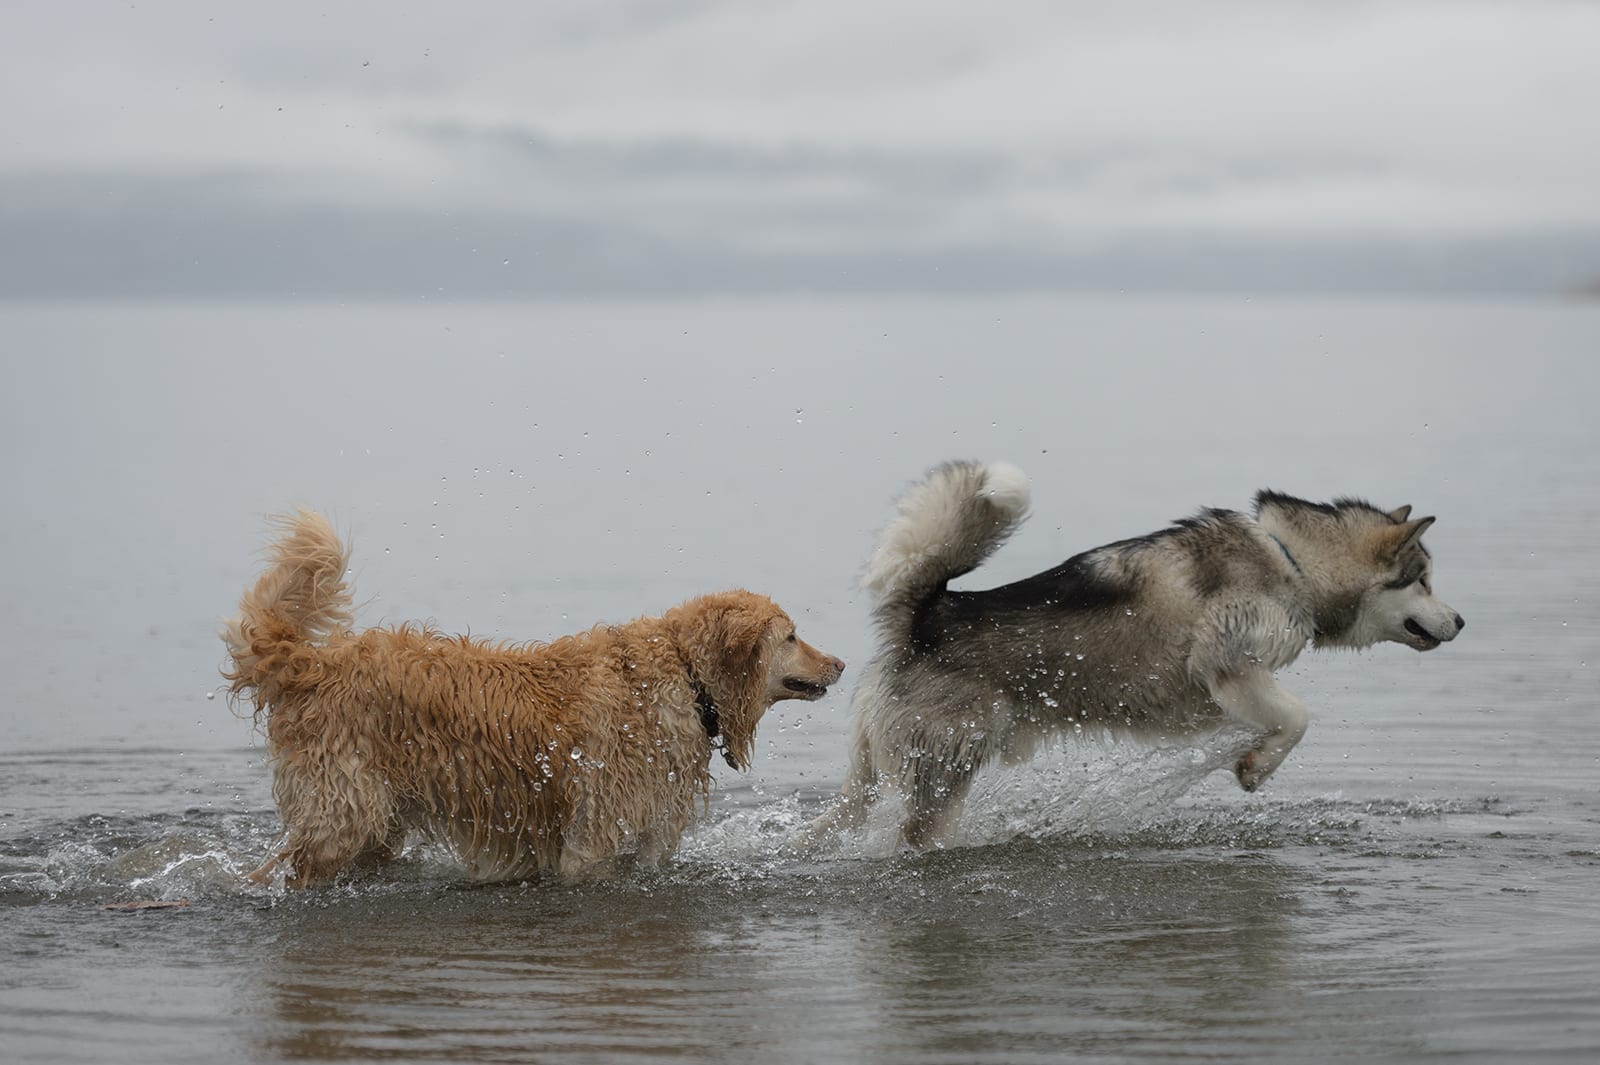 A golden retriever and a husky playing together in the ocean water